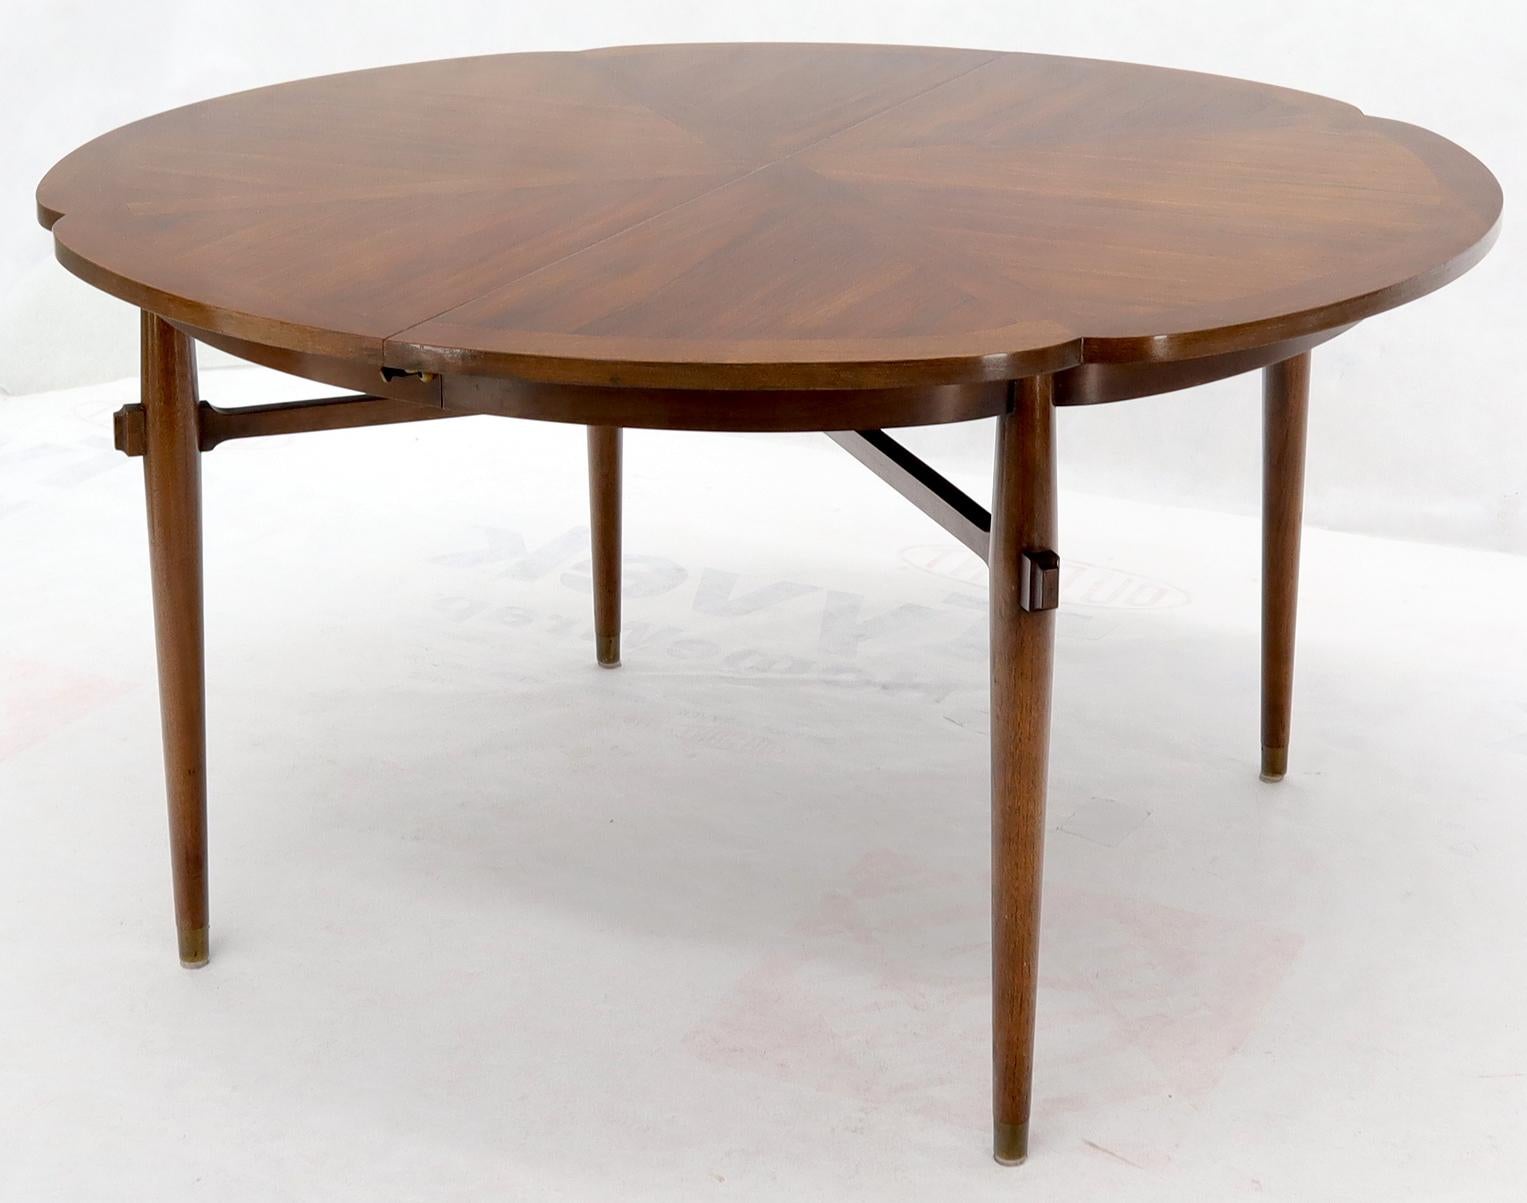 American Walnut Daisy Shape Top Dining Table with Two Extension Boards Leaves